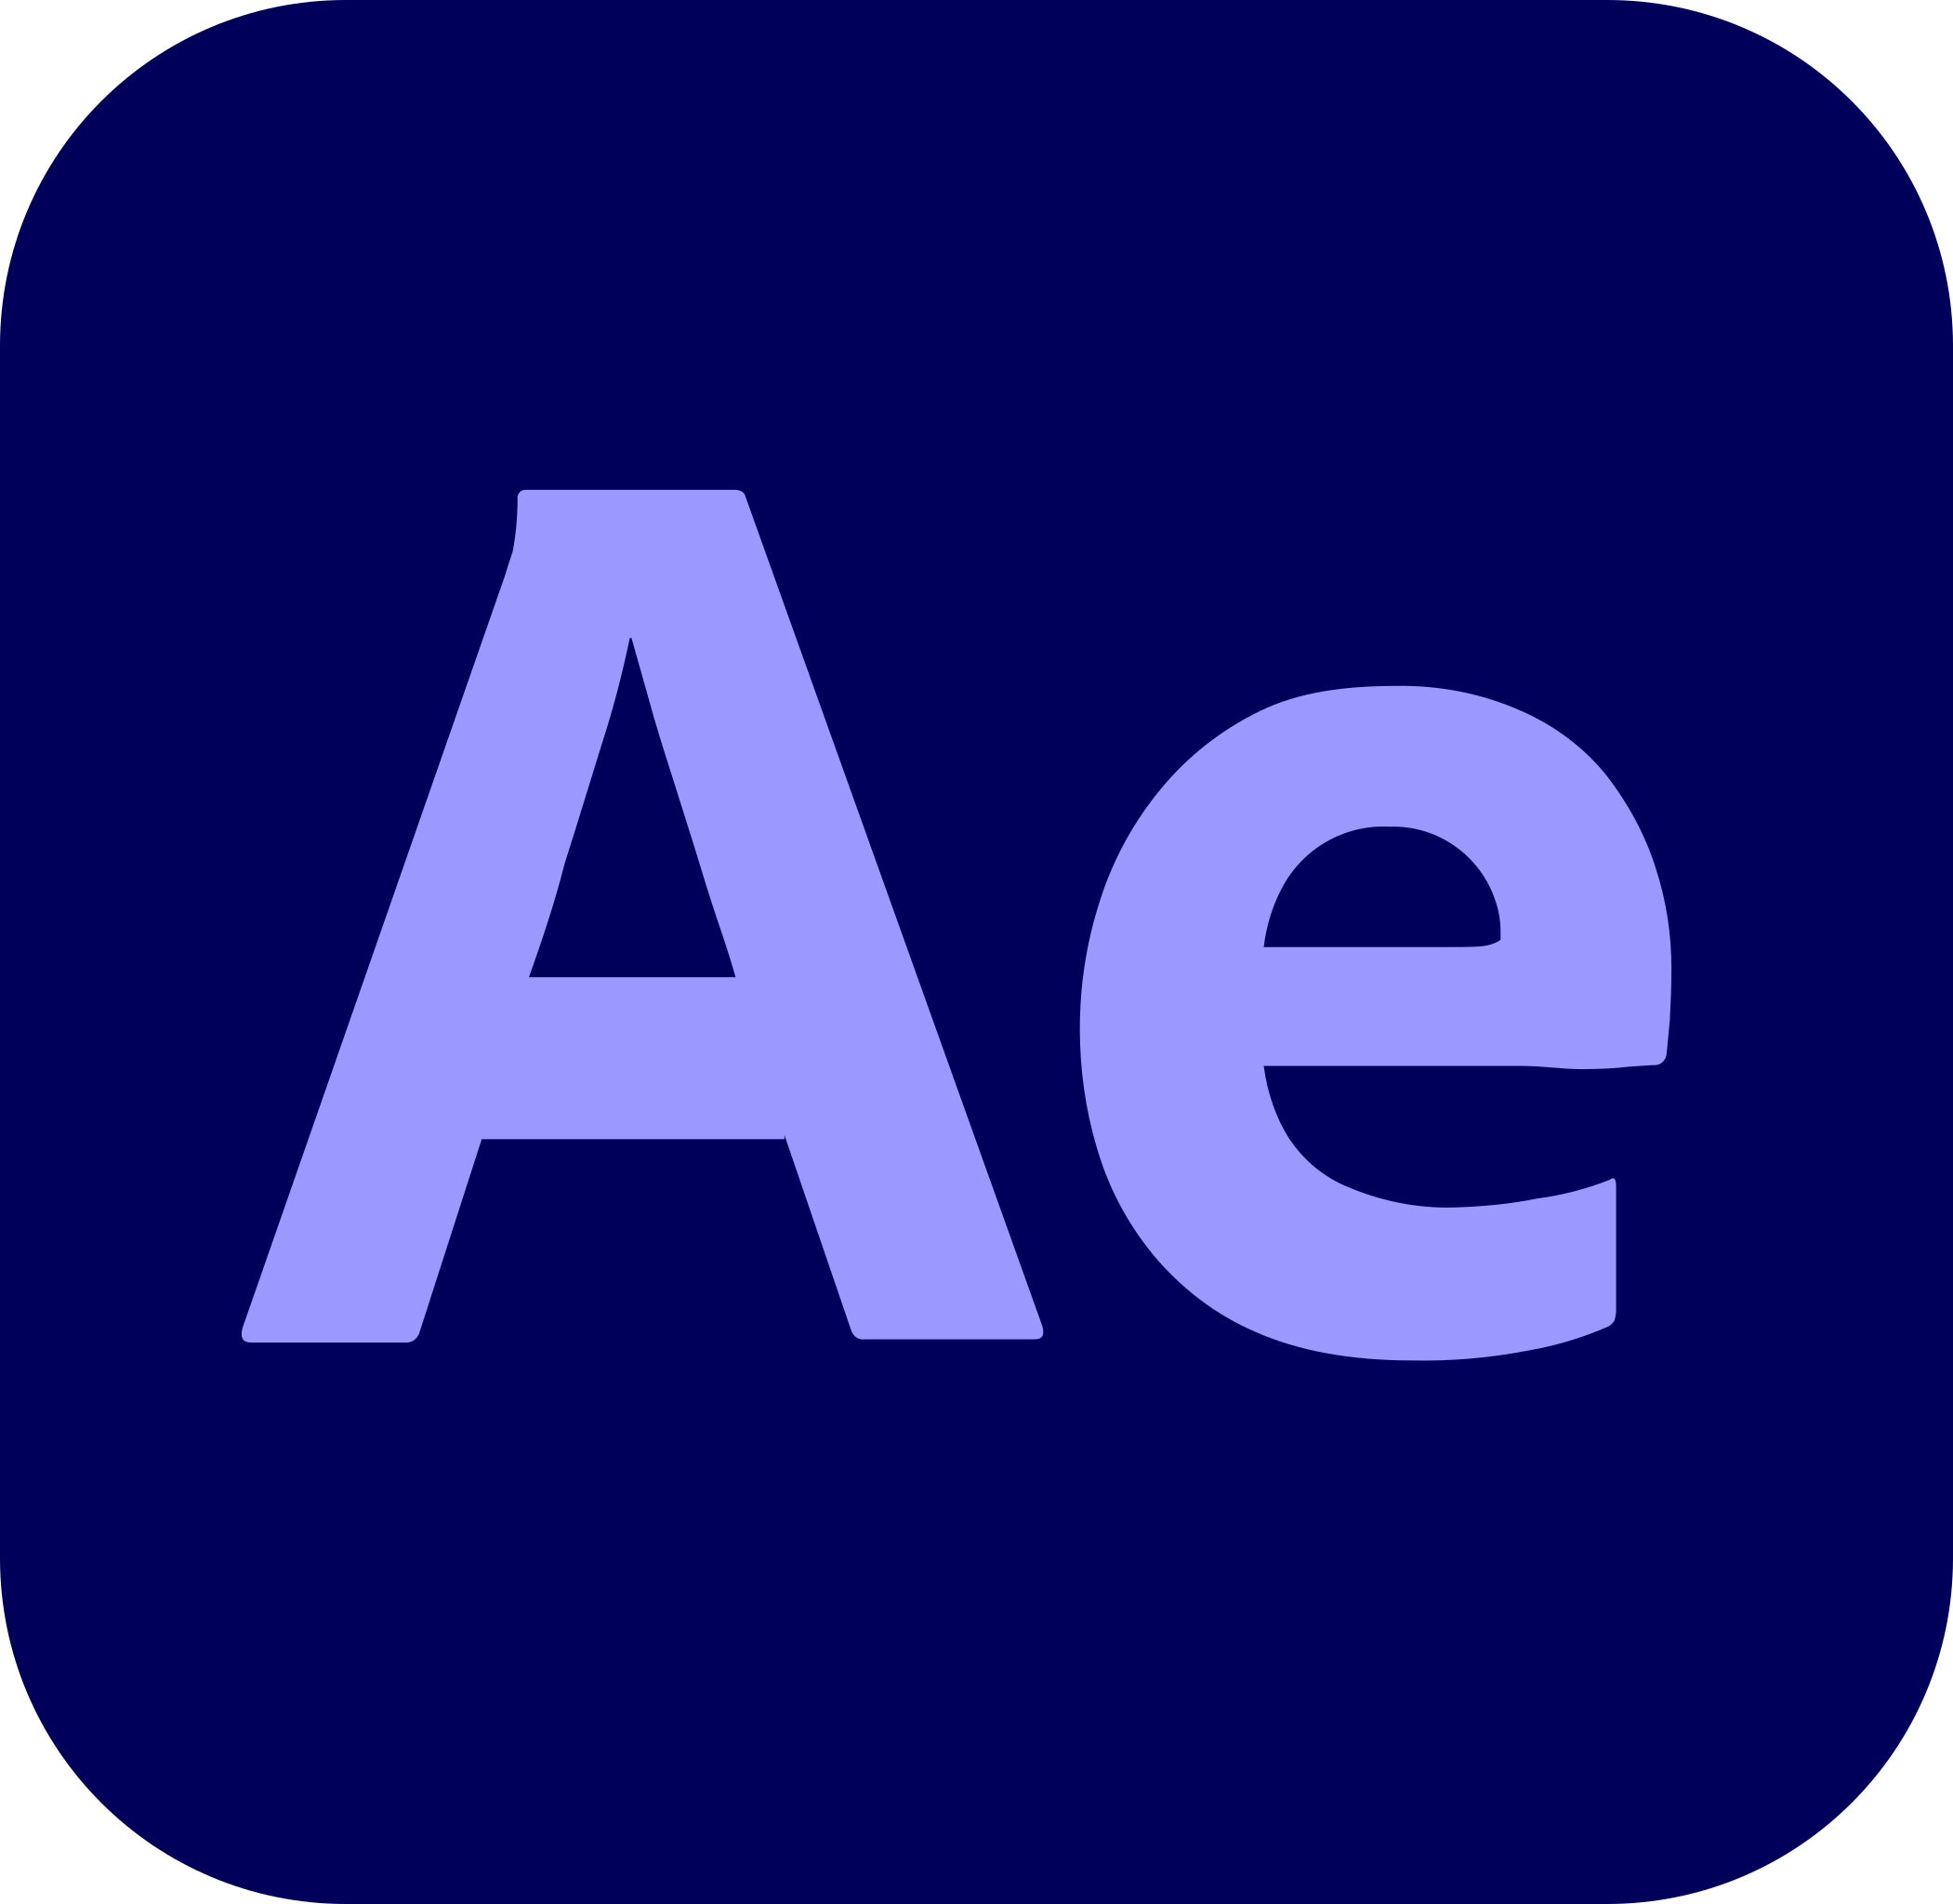 Adobe_After_Effects_CC_icon.svg.png